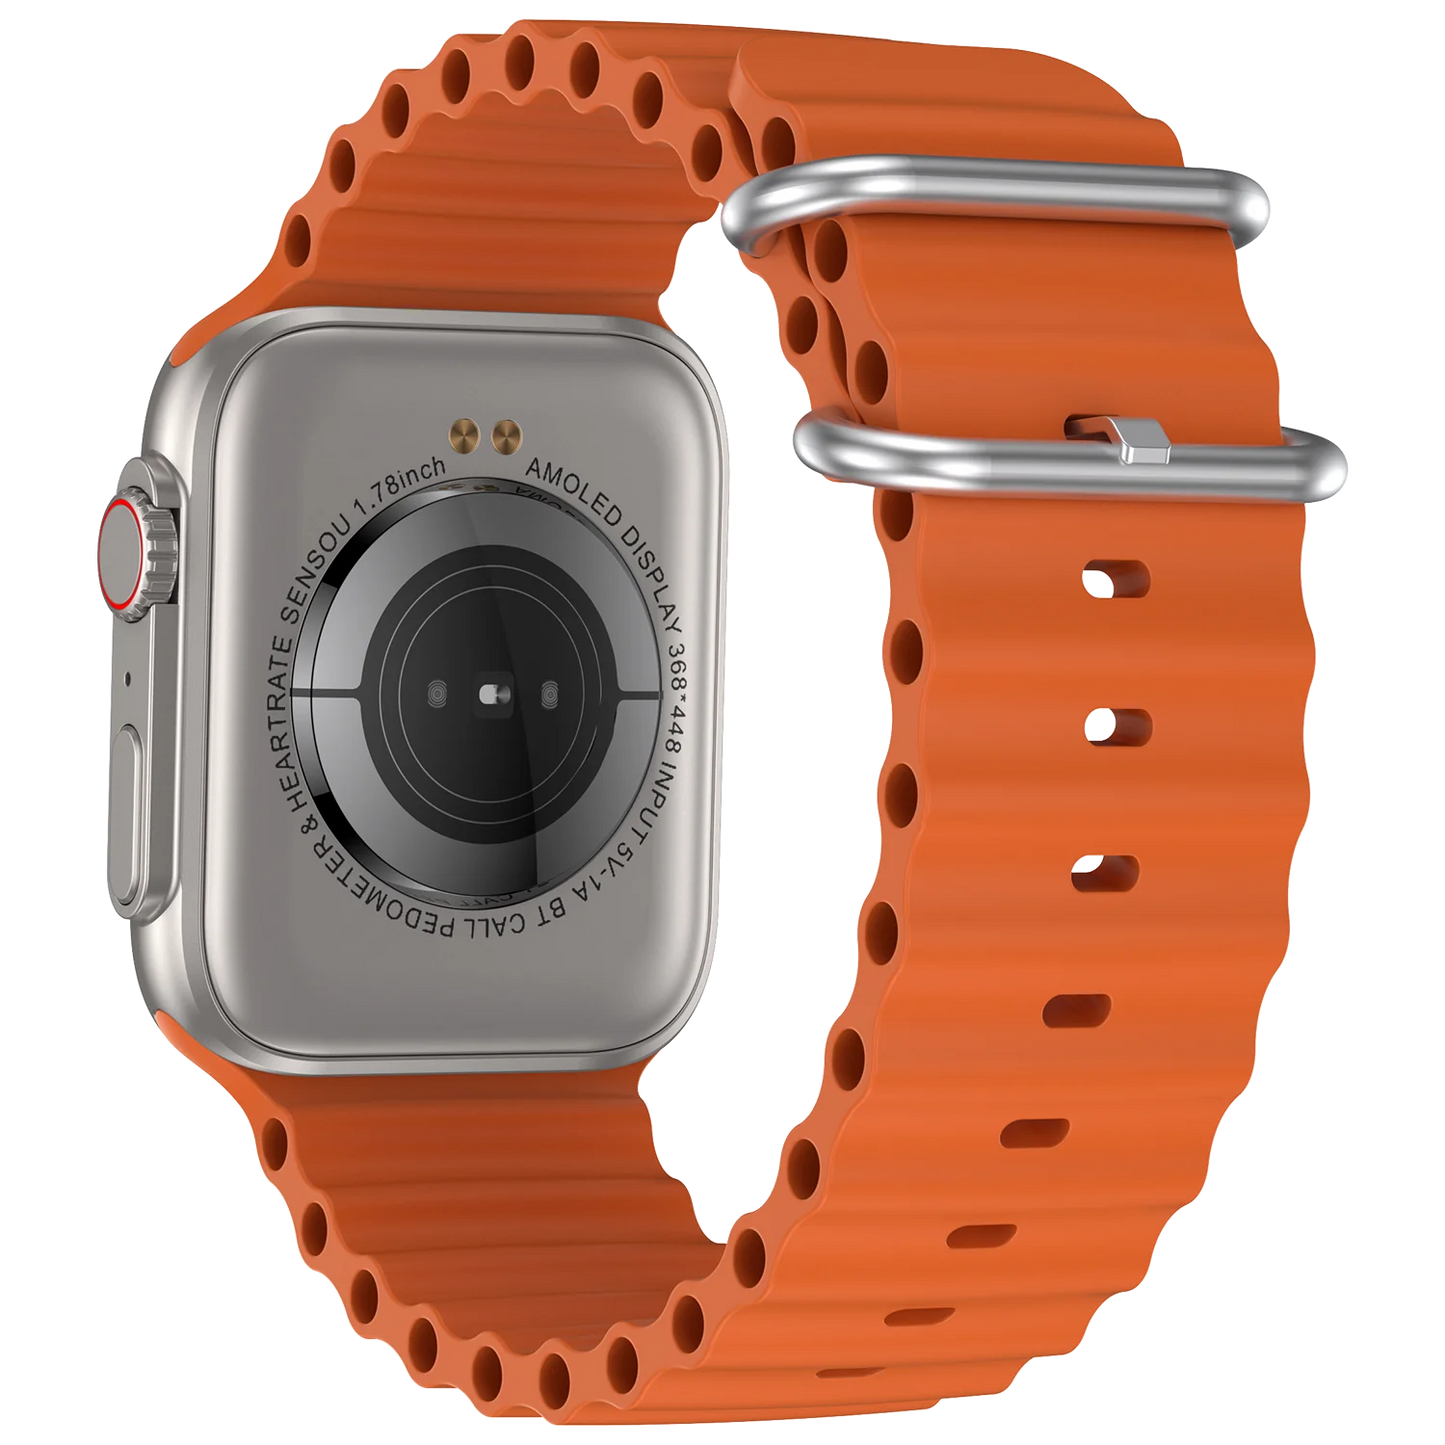 Fire-Boltt Edge Smartwatch with built-in Speaker and Microphone